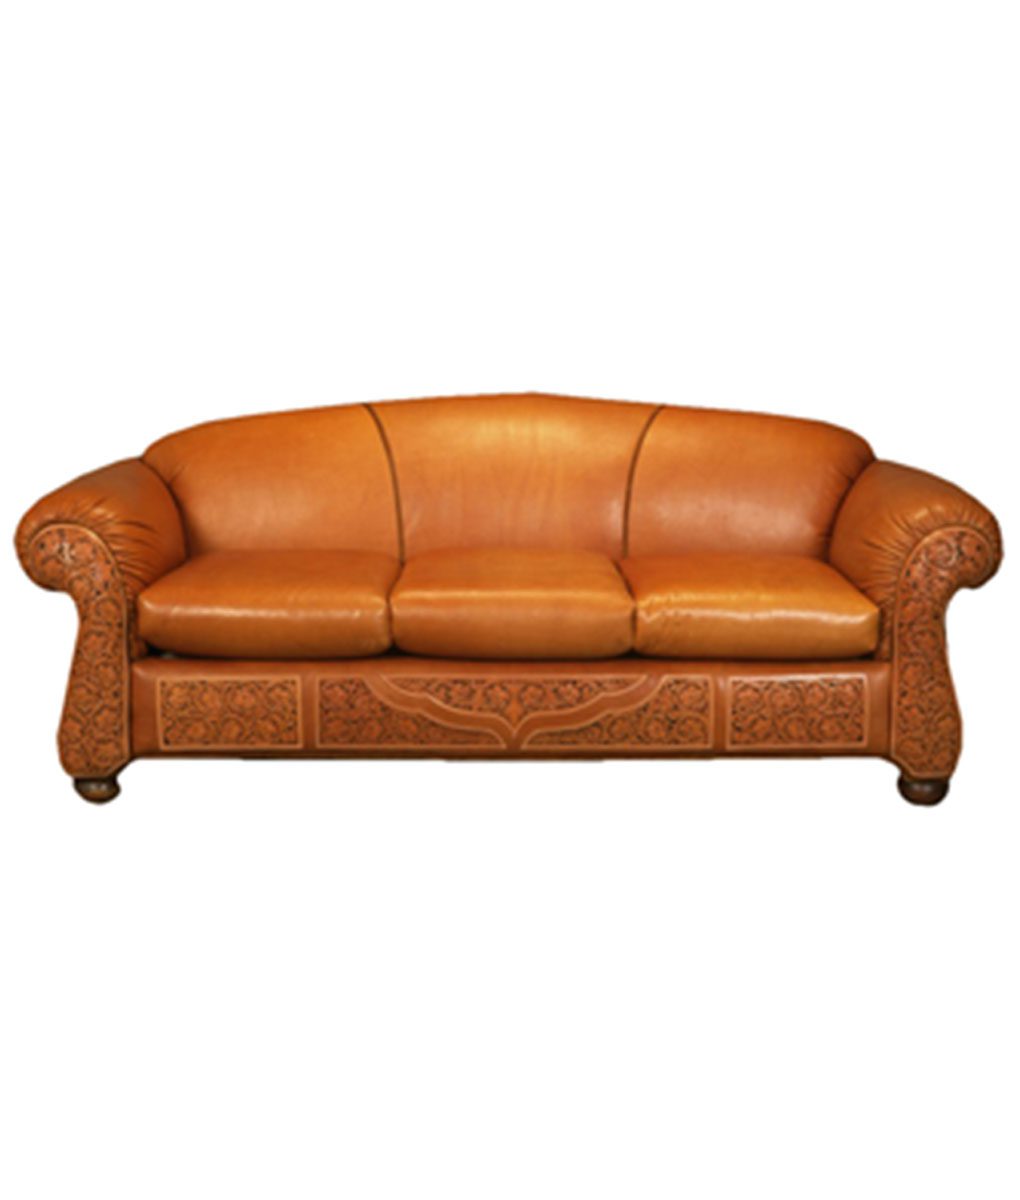 Tooled Leather Sofa Western, Western Style Leather Couches